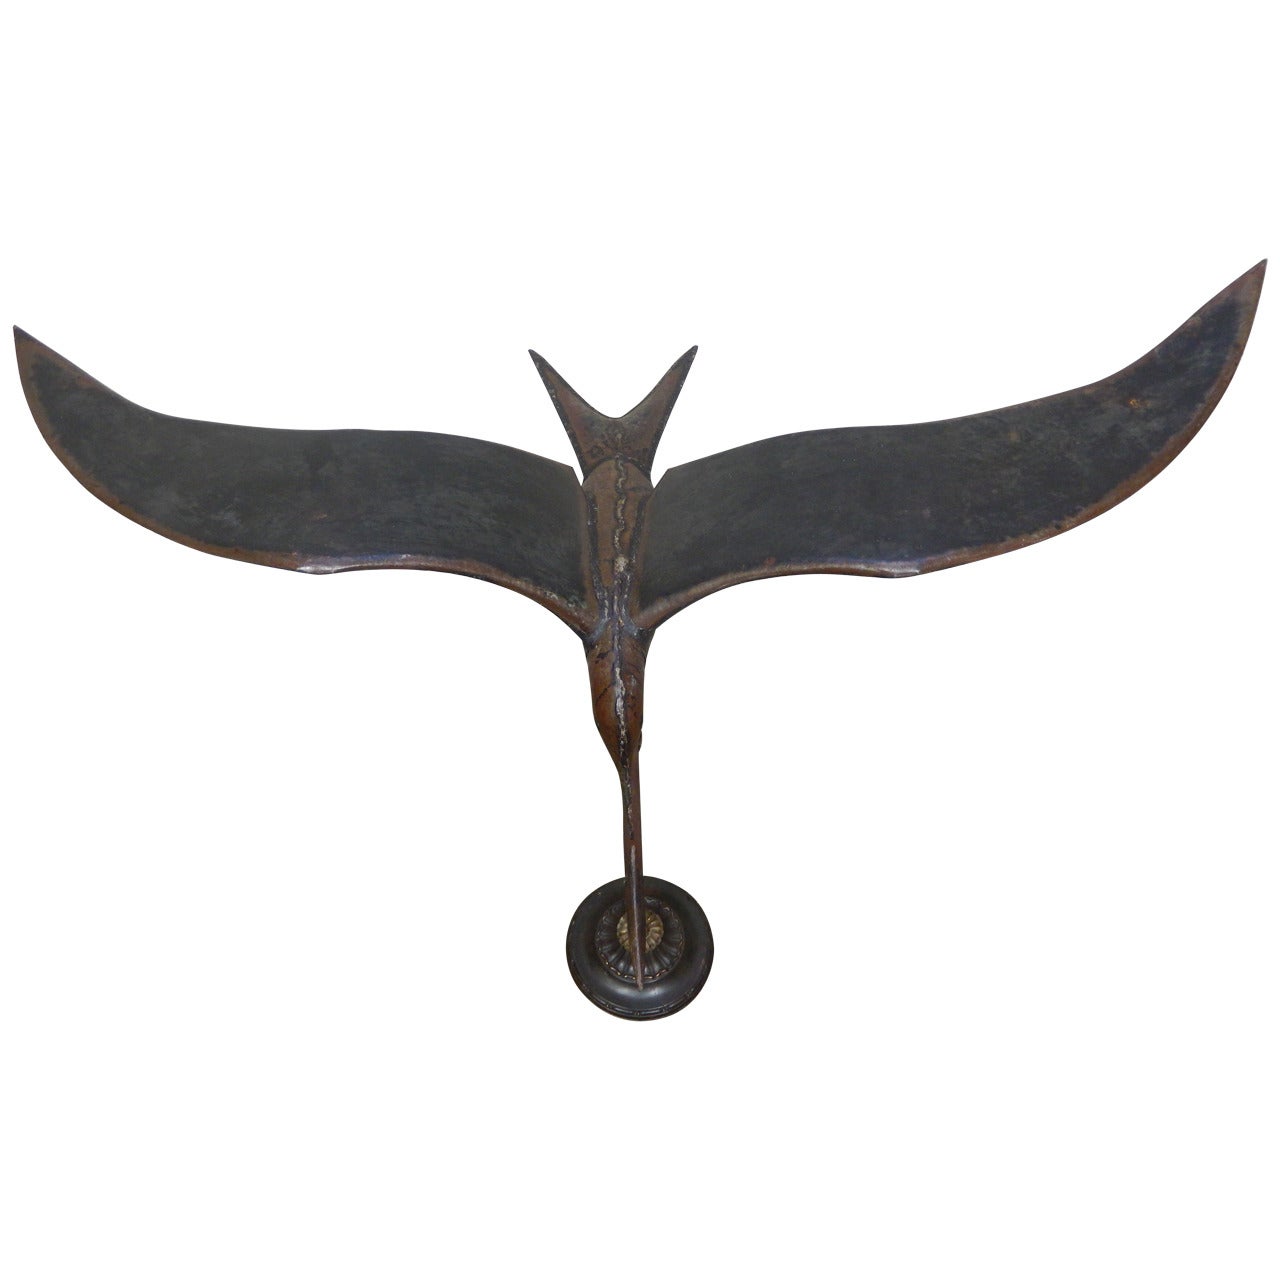 Copper Weathervane of a Swallowtail Kite For Sale